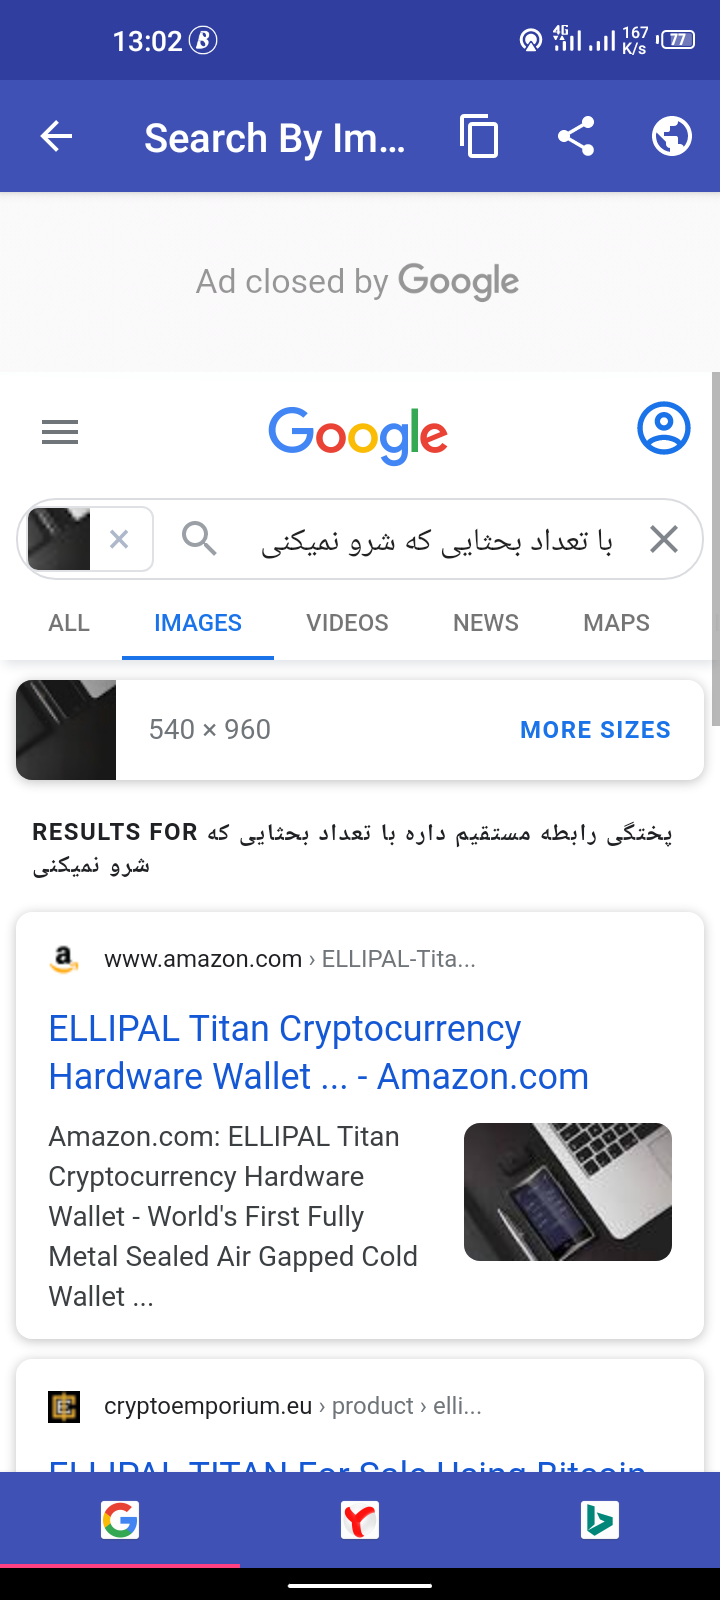 search by image search result screen